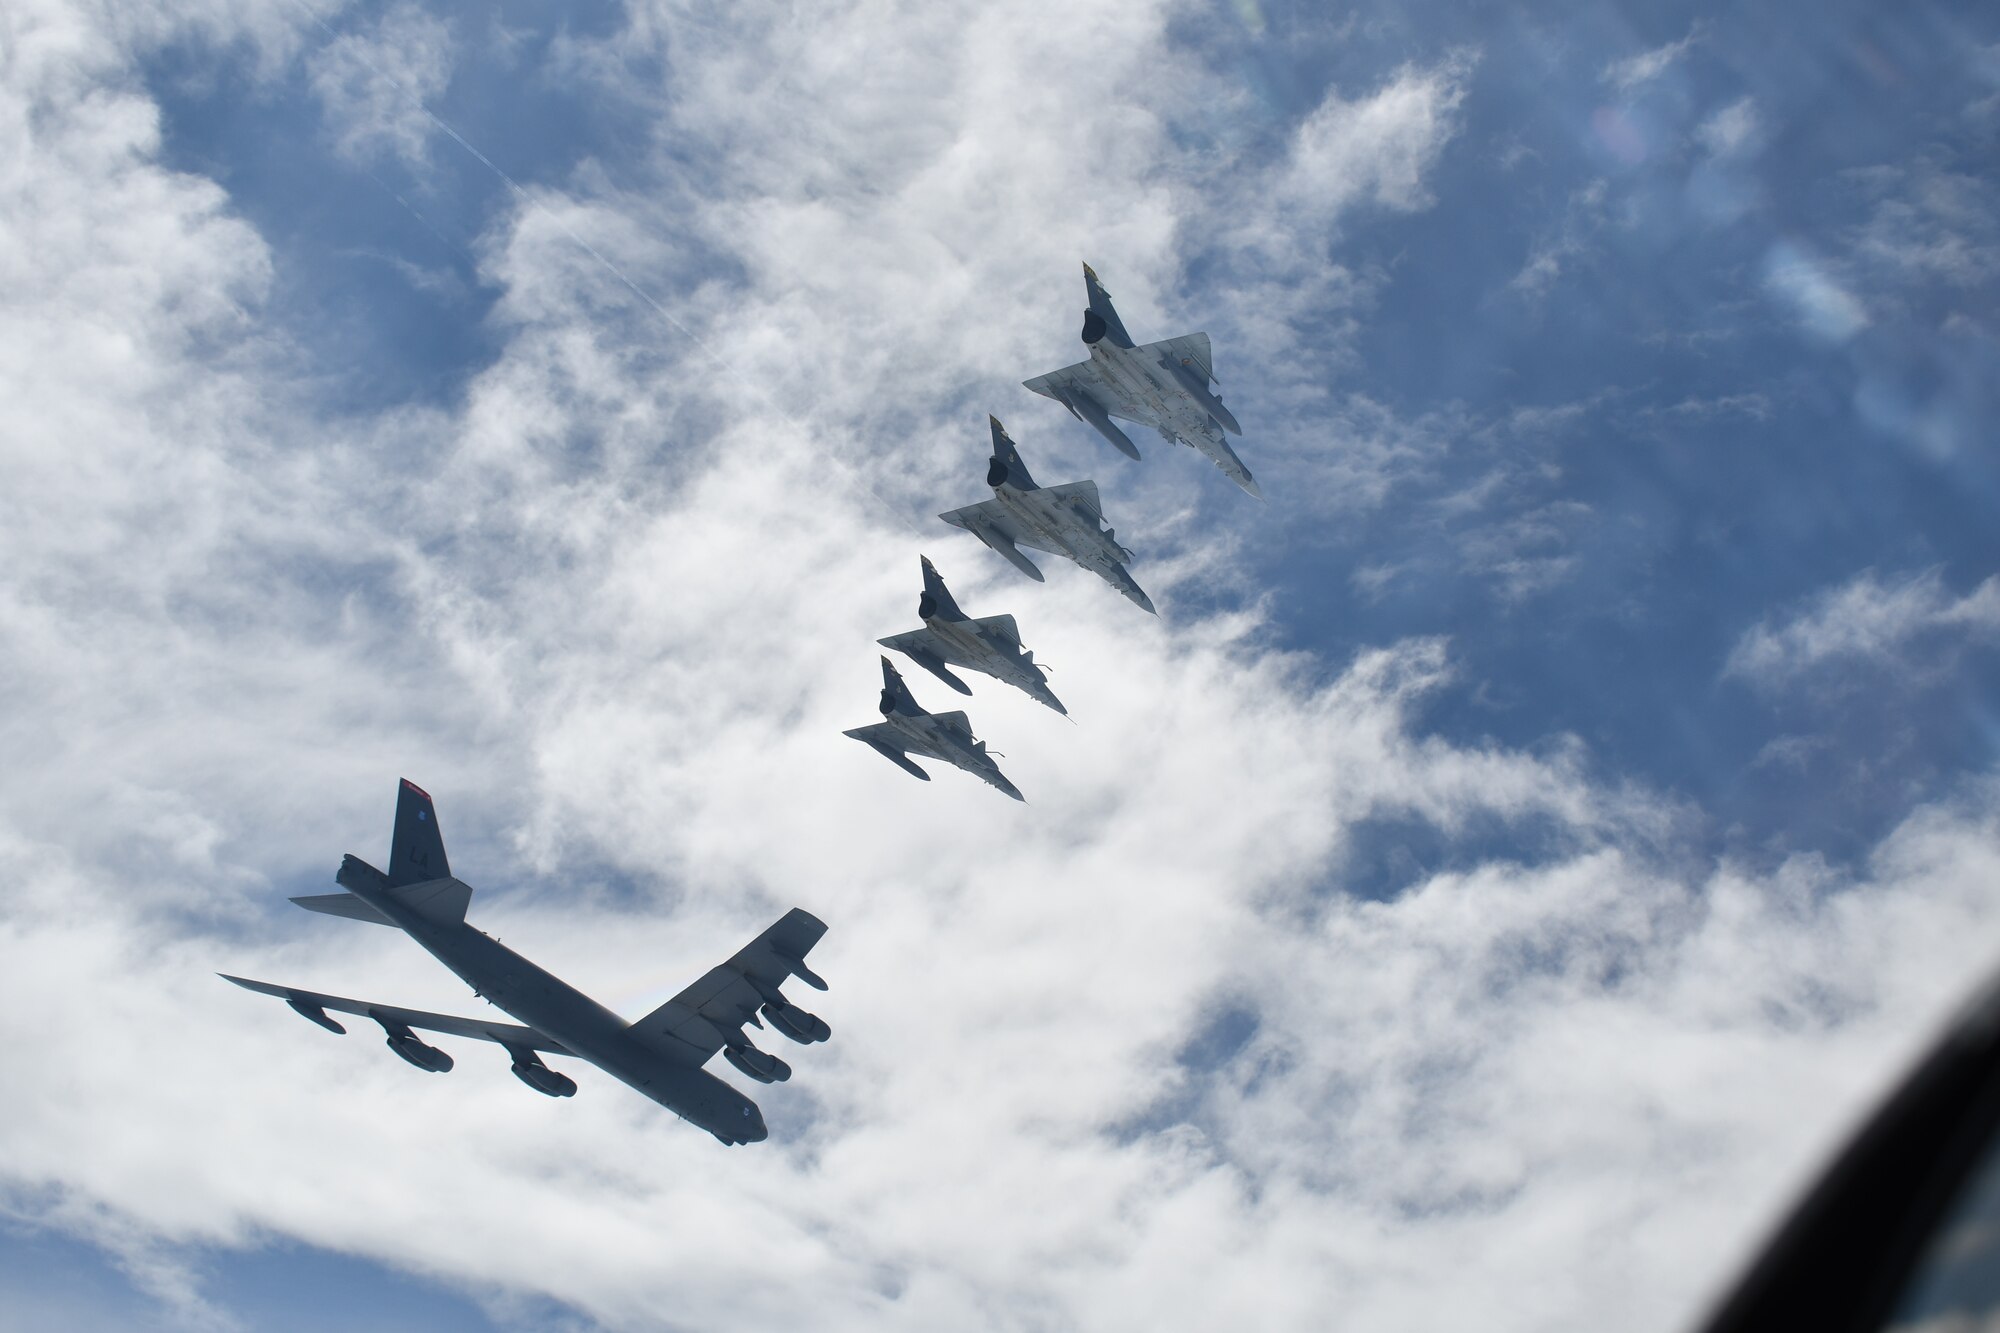 U.S. aircraft and Colombian aircraft flying in formation